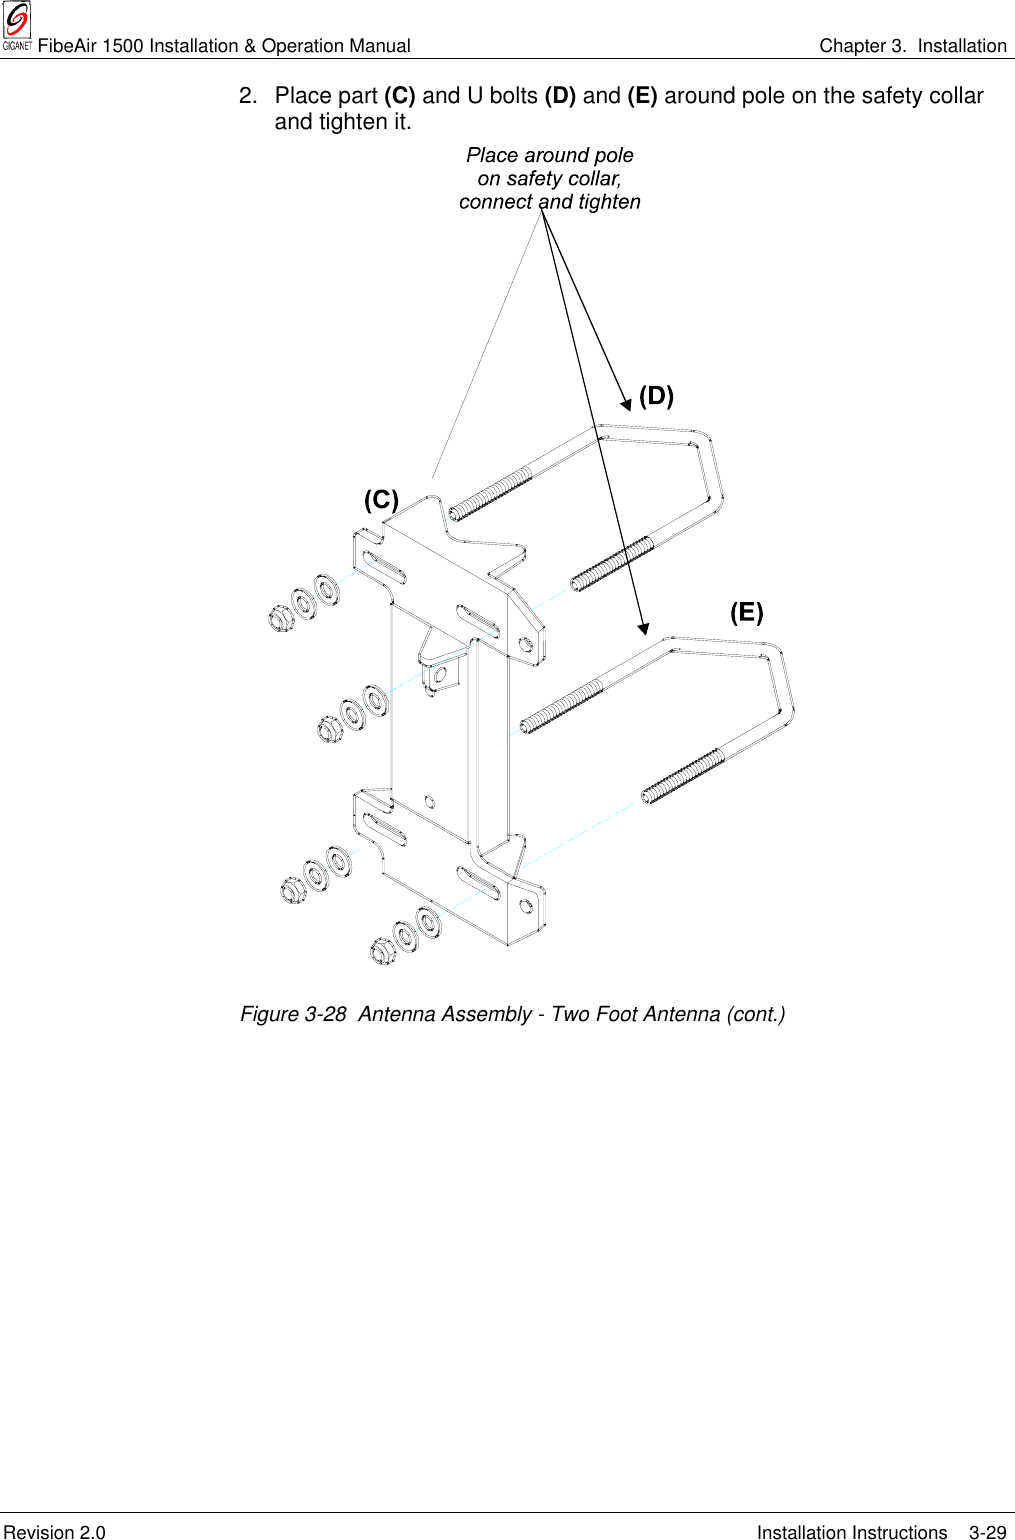  FibeAir 1500 Installation &amp; Operation Manual Chapter 3.  InstallationRevision 2.0 Installation Instructions 3-292. Place part (C) and U bolts (D) and (E) around pole on the safety collarand tighten it.Figure 3-28  Antenna Assembly - Two Foot Antenna (cont.)